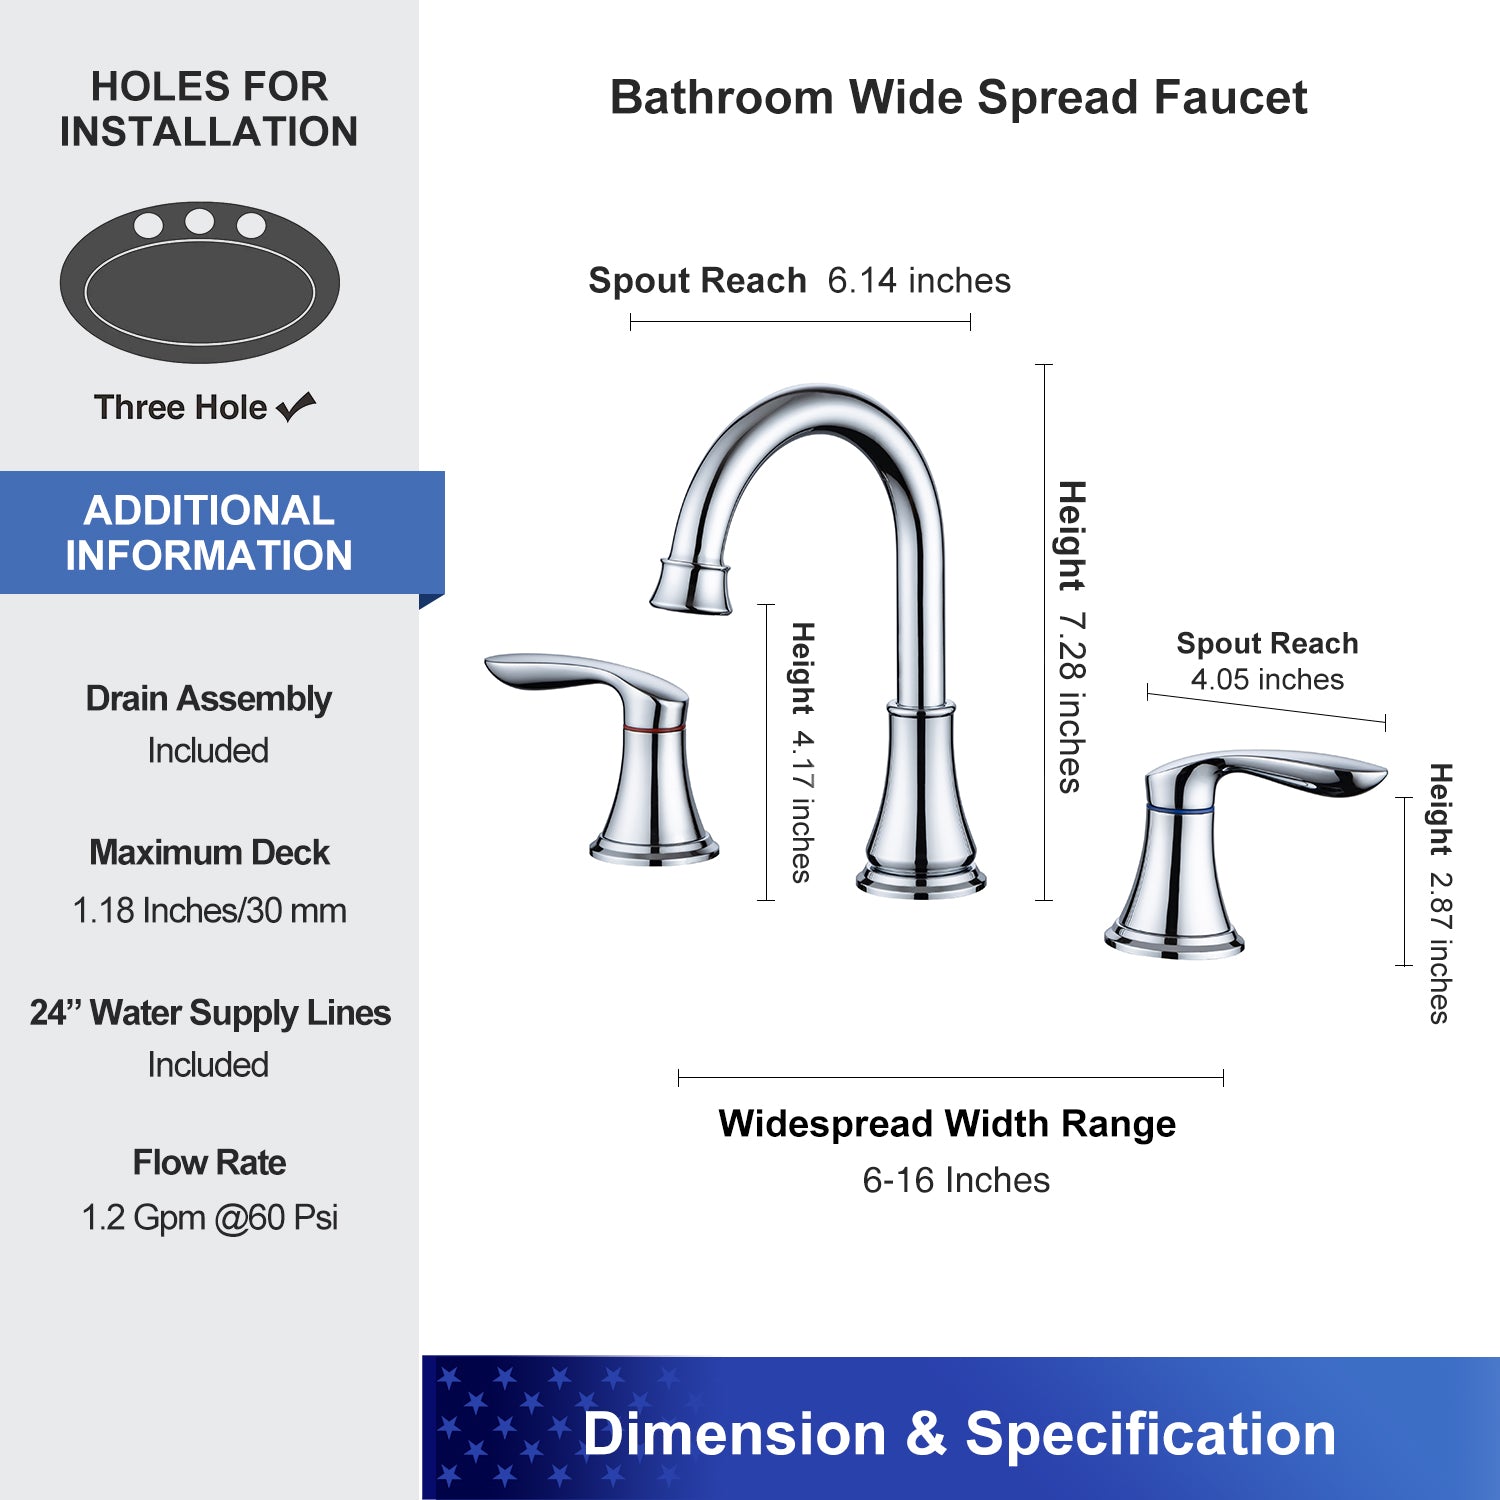 Widespread Faucet 2-handle Bathroom Faucet with Drain Assembly RX83001